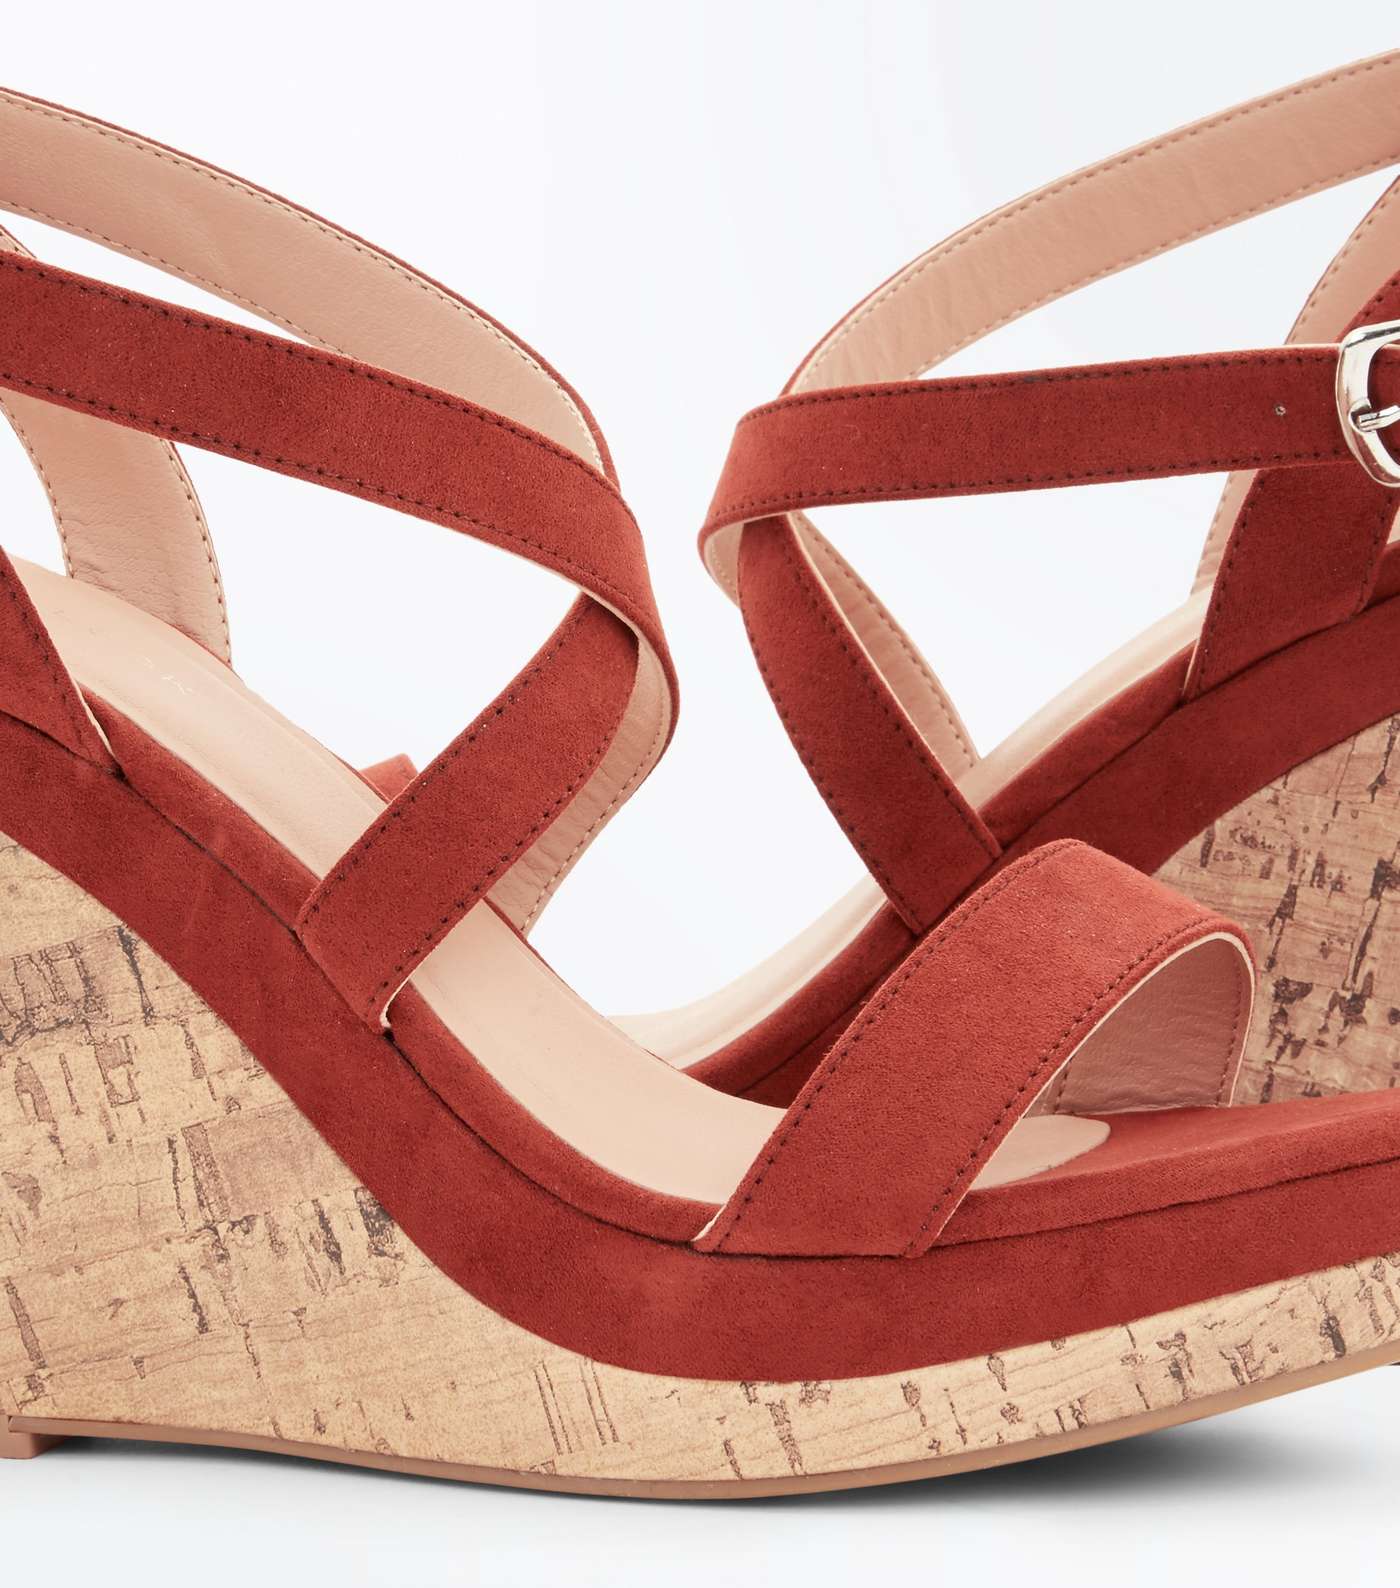 Rust Suedette Strappy Cork Wedges Image 4